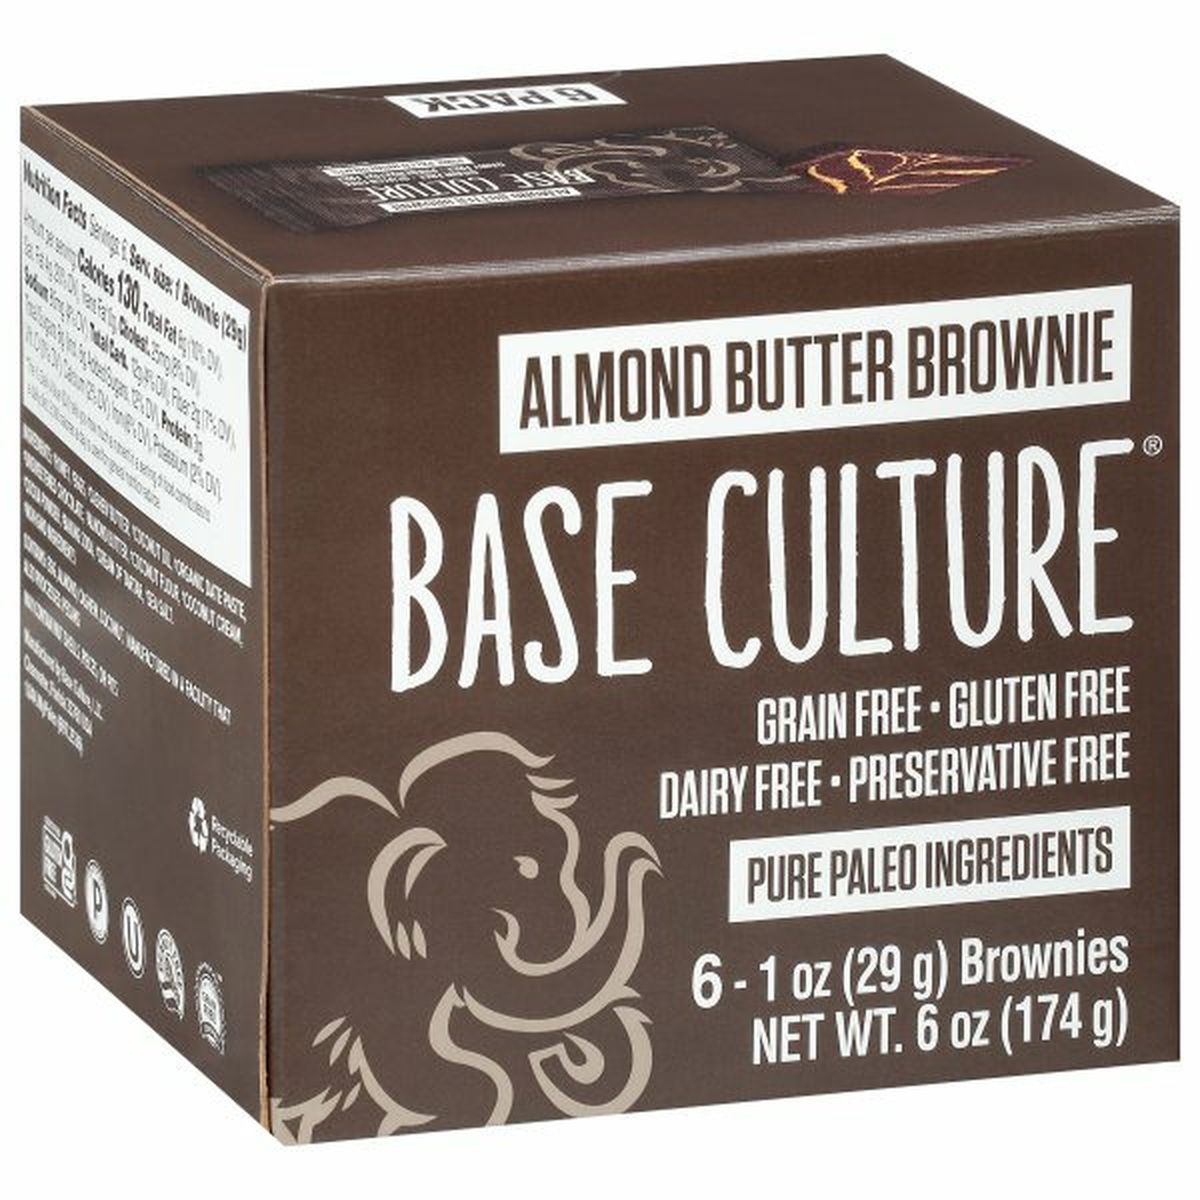 Calories in Base Culture Brownies, Almond Butter, 6 Pack